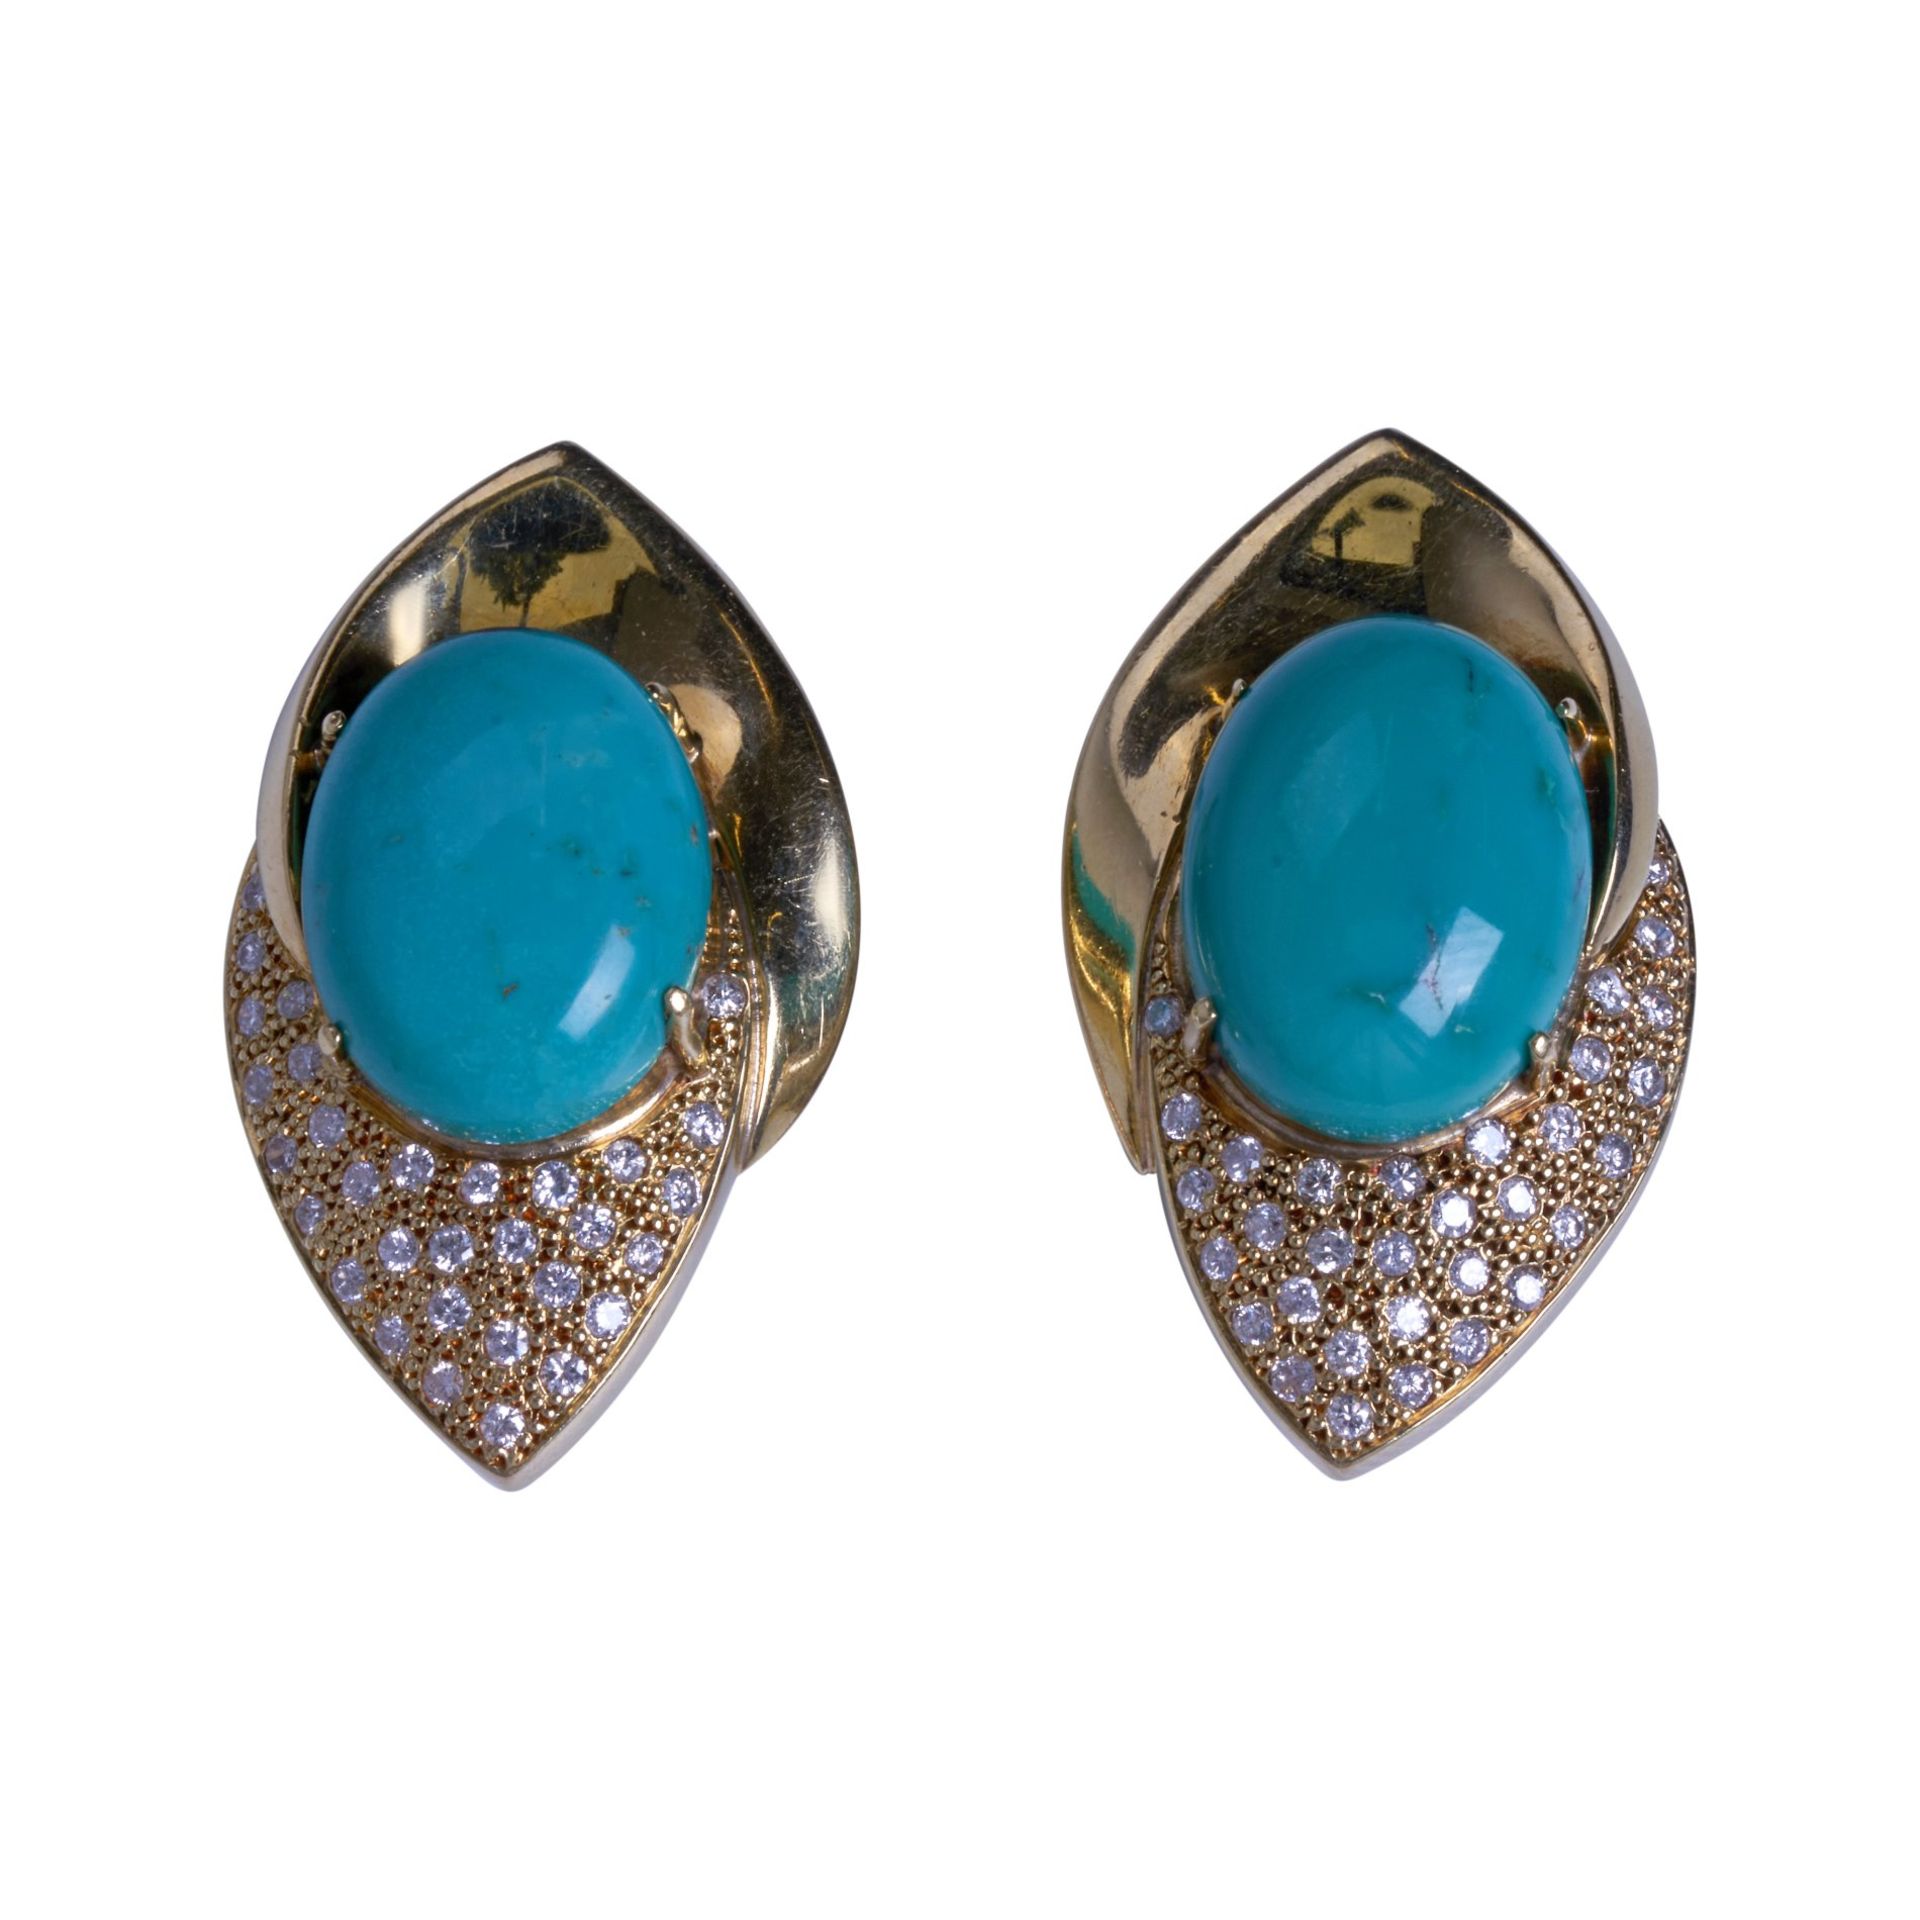 18CT YELLOW GOLD TURQUOISE AND DIAMOND CLIP EARRINGS